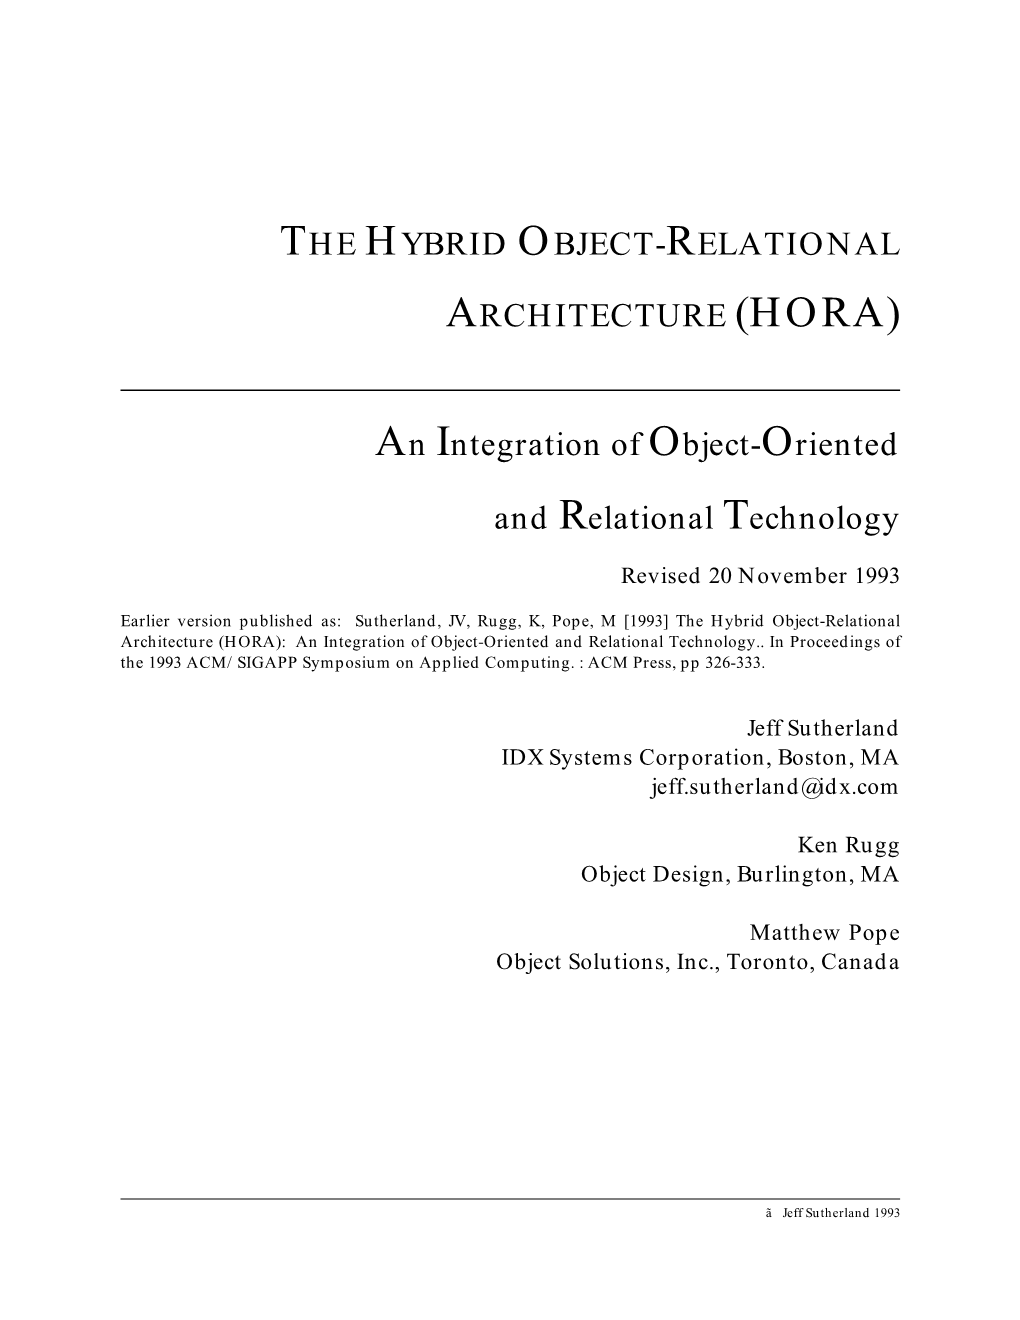 The Hybrid Object-Relational